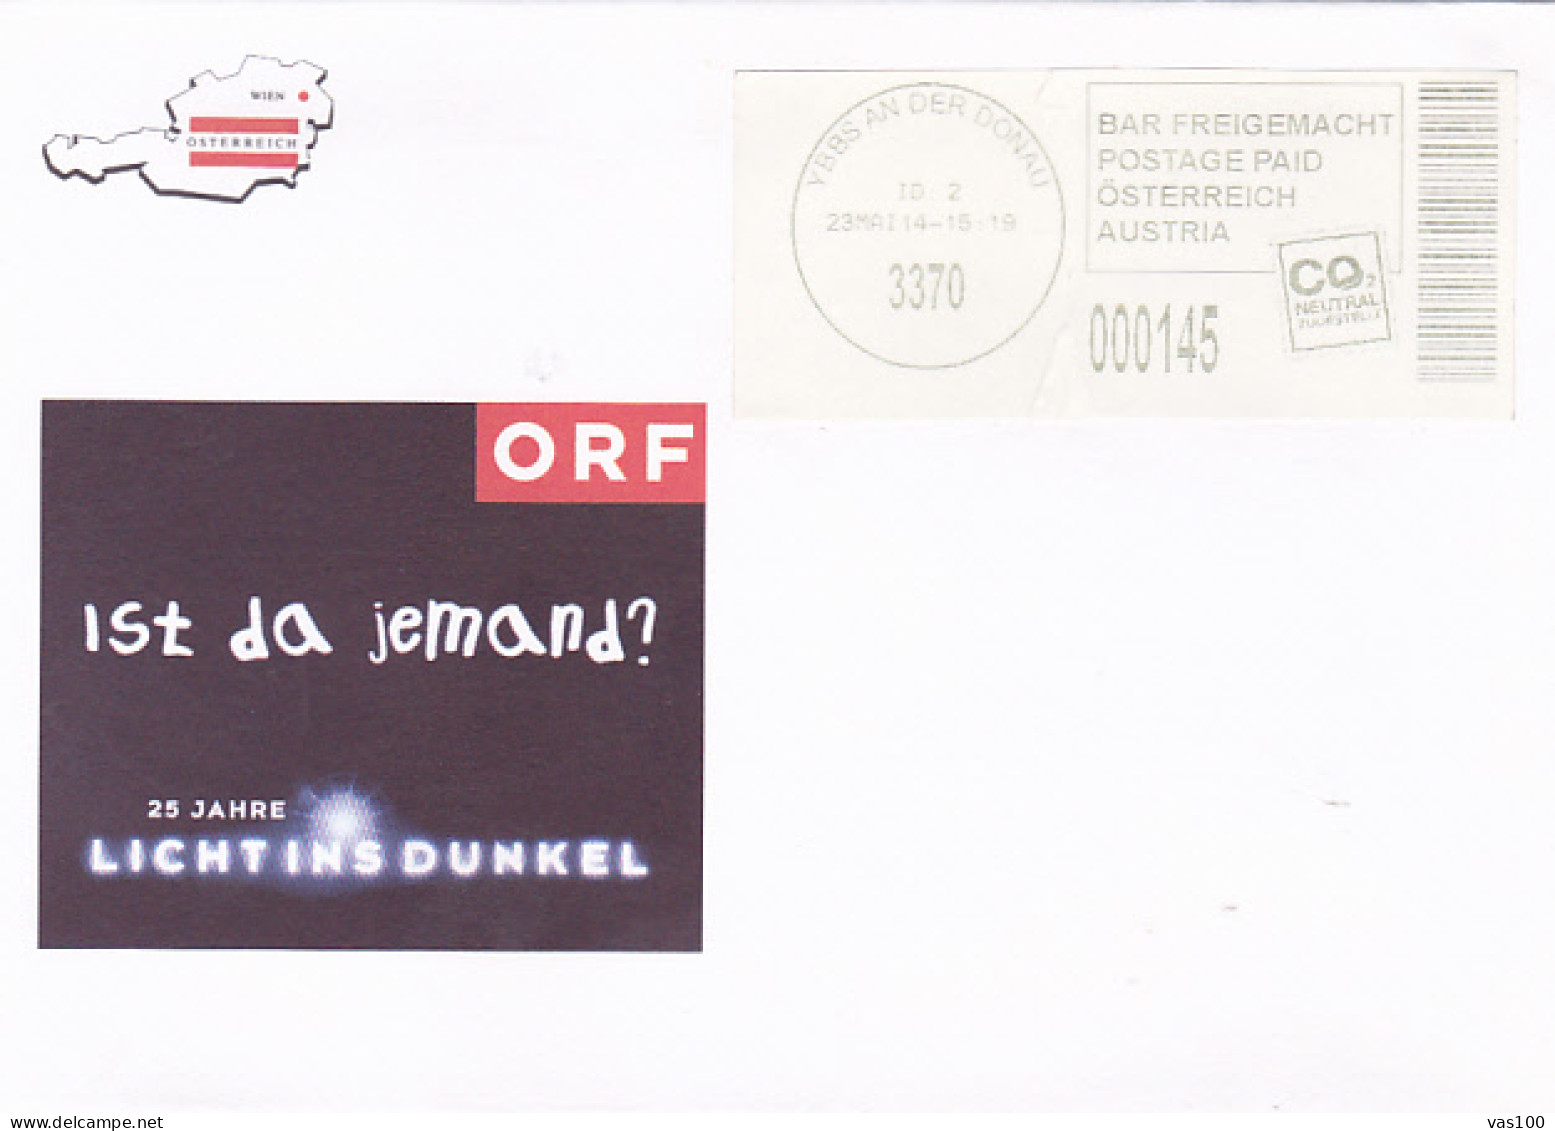 LIGHT IN THE DARK TELETHON ADVERTISING, POSTAGE PAID SPECIAL COVER, 2014, AUSTRIA - Covers & Documents